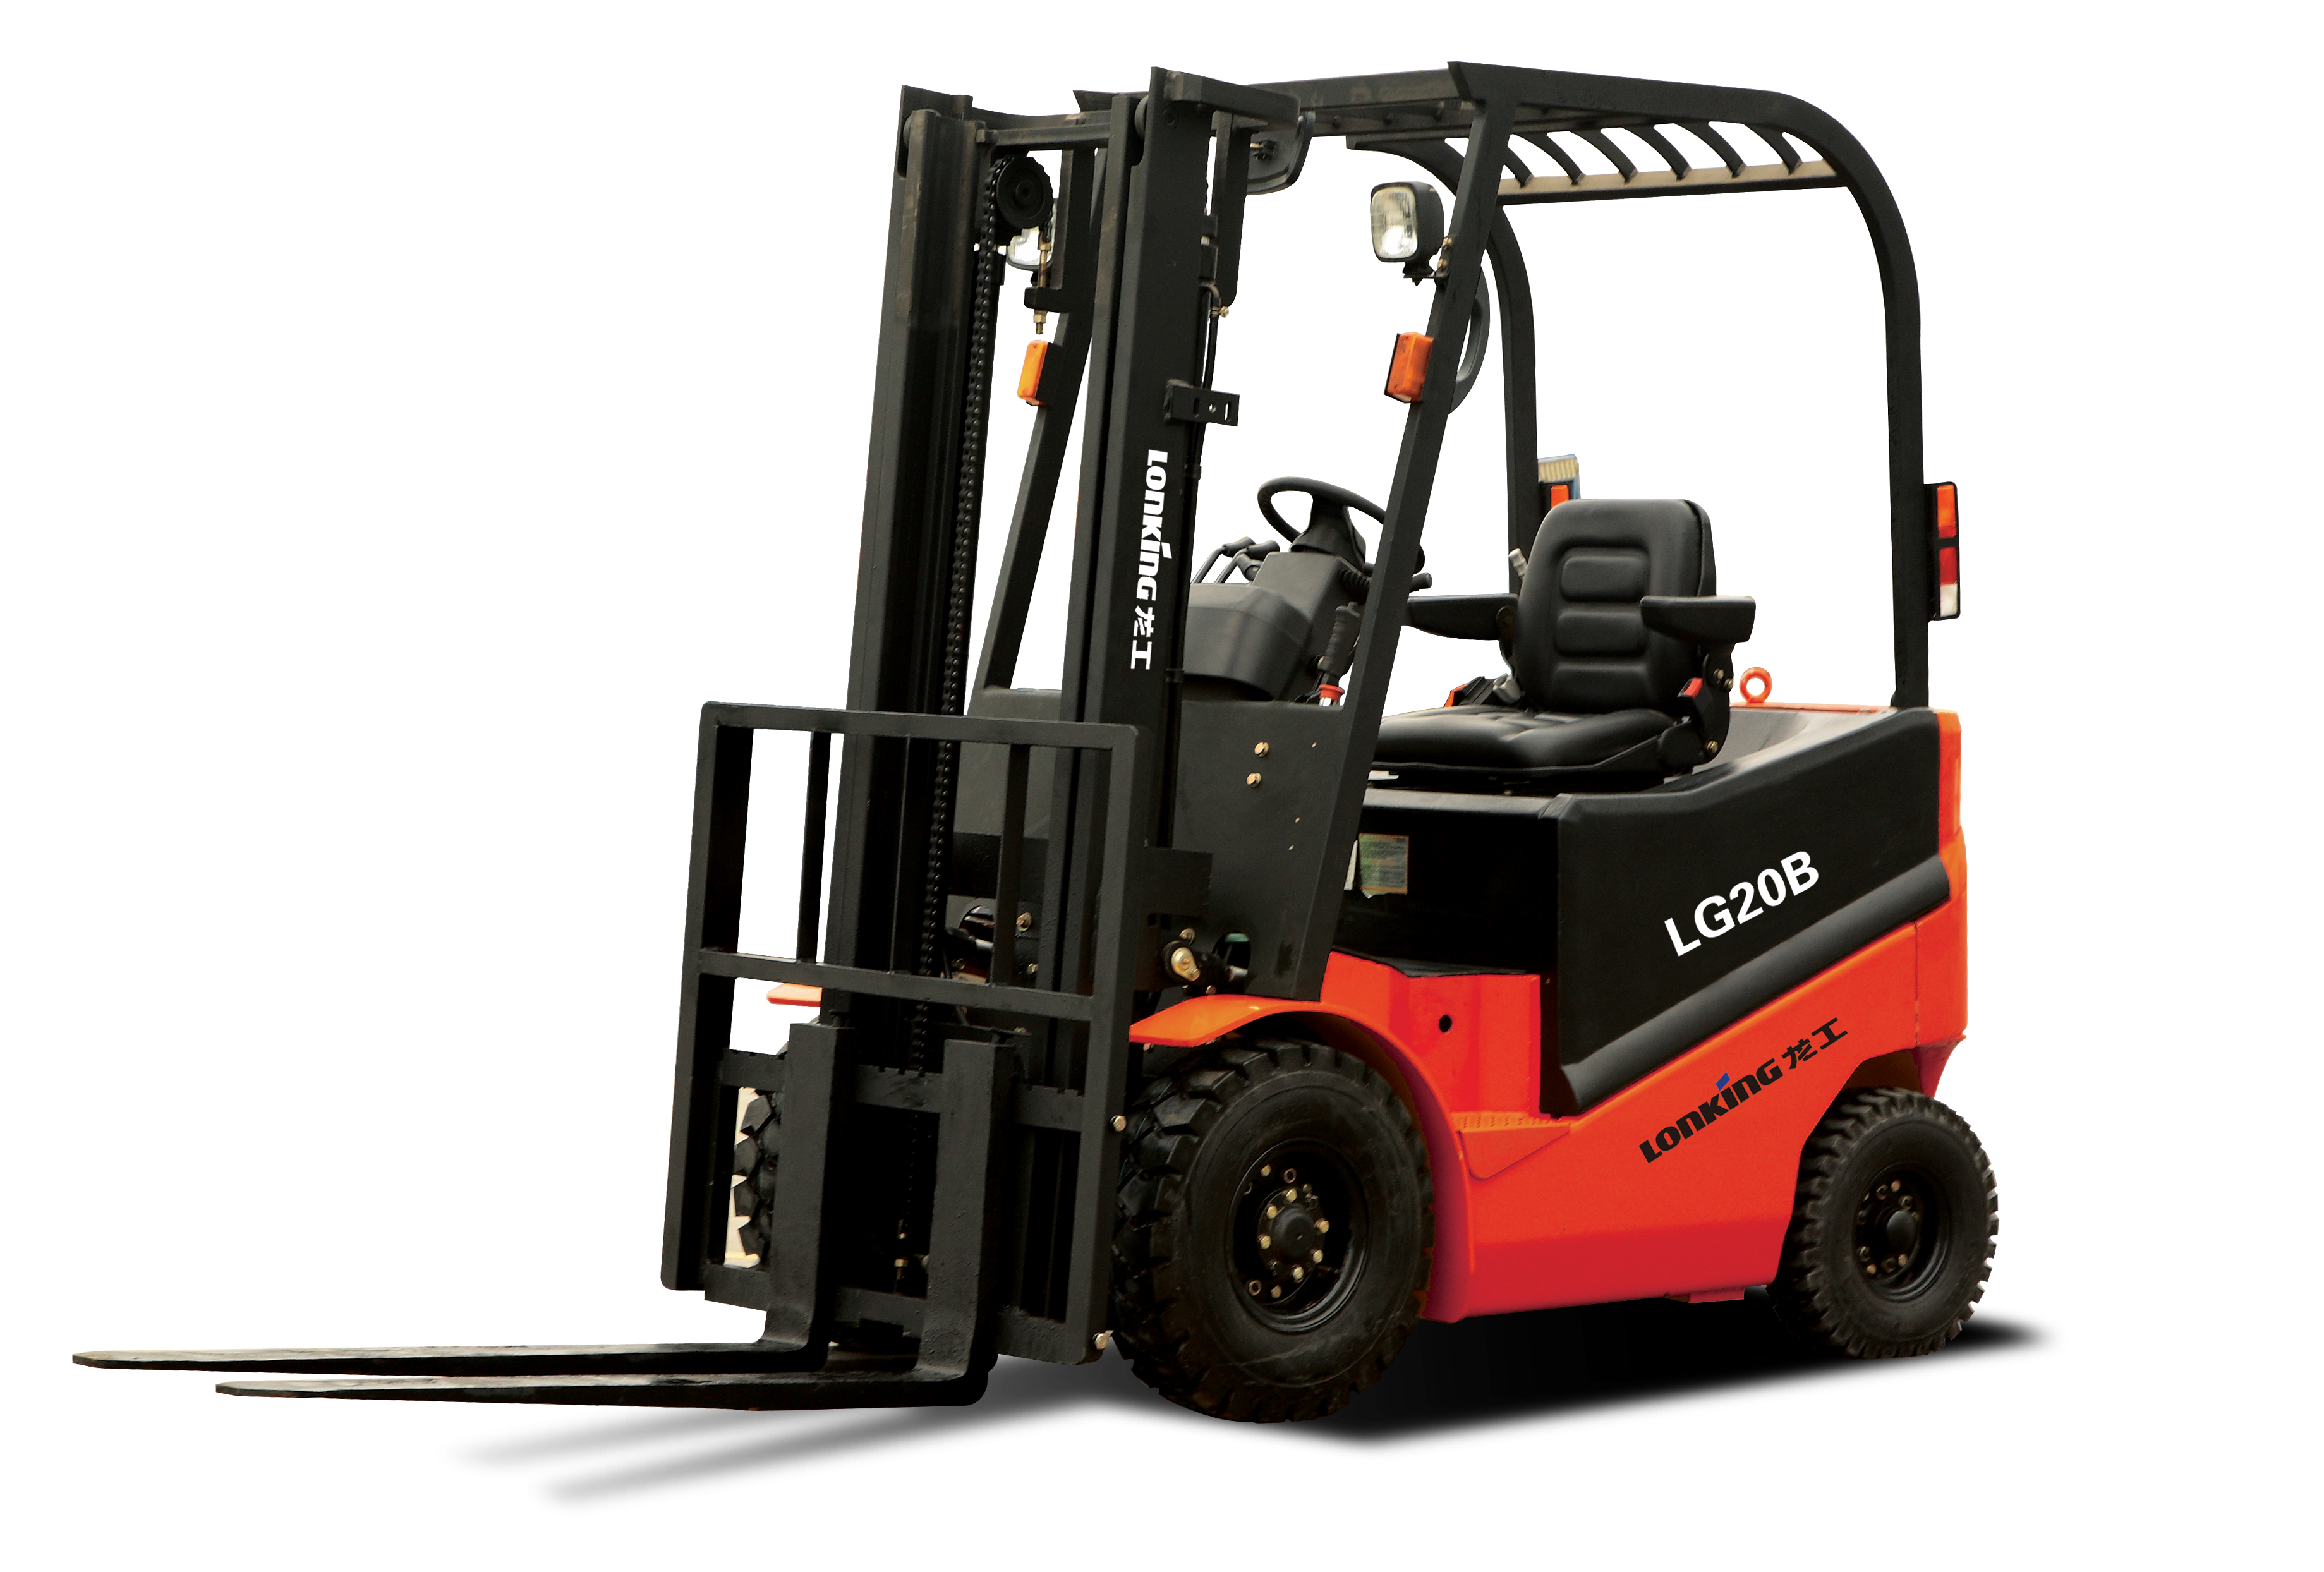 Lonking LG20B Electric forklift